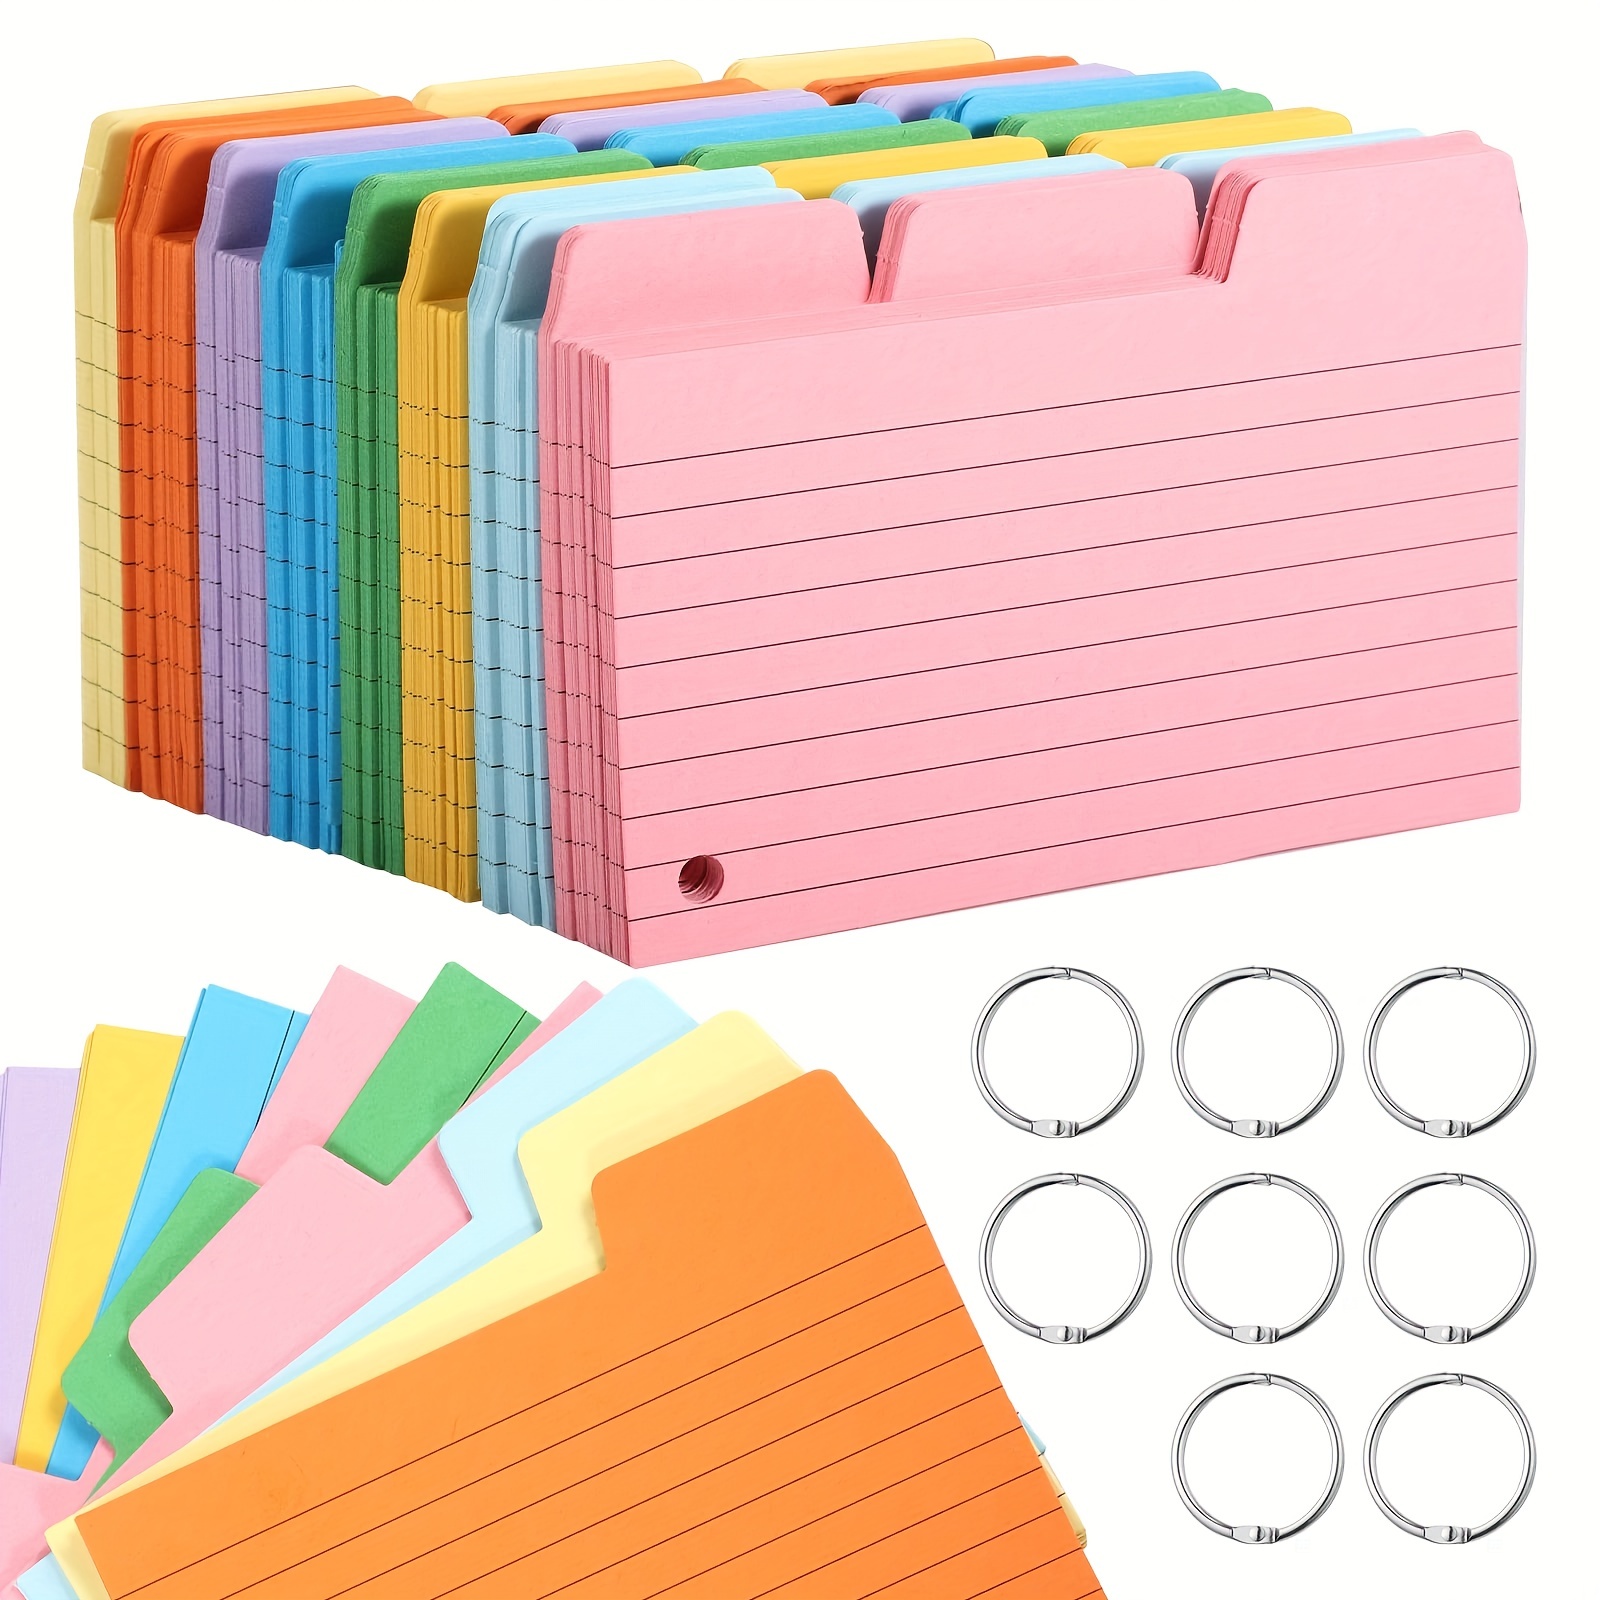 3X5 4X6 Inch American Index Card Index Cards Word Card Learning Plan Memo  Card Storage Box - AliExpress